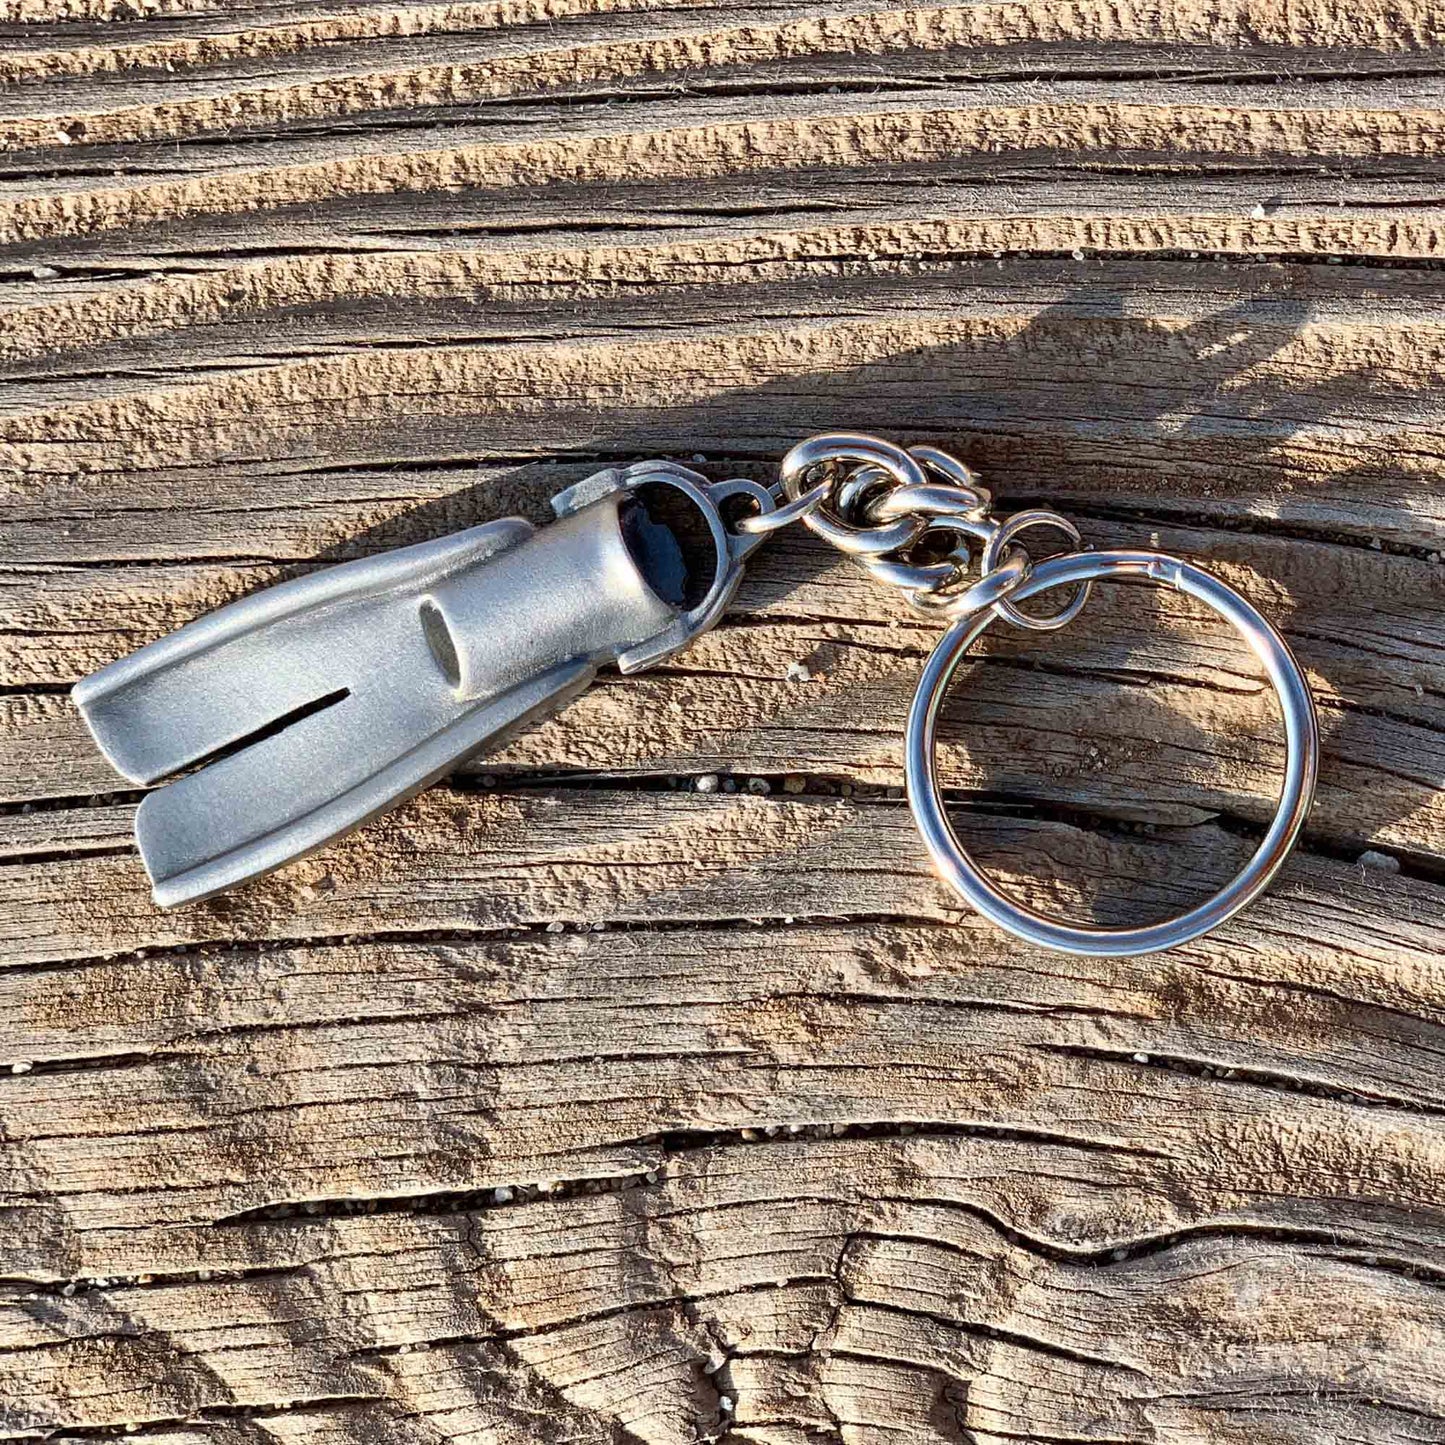 Dive Fin Keychain for Men and Women- Scuba Keychain, Dive Flipper Key Ring, Gifts for Scuba Divers, Scuba Diving Key Fob, Dive Fin Lanyard - The Tool Store